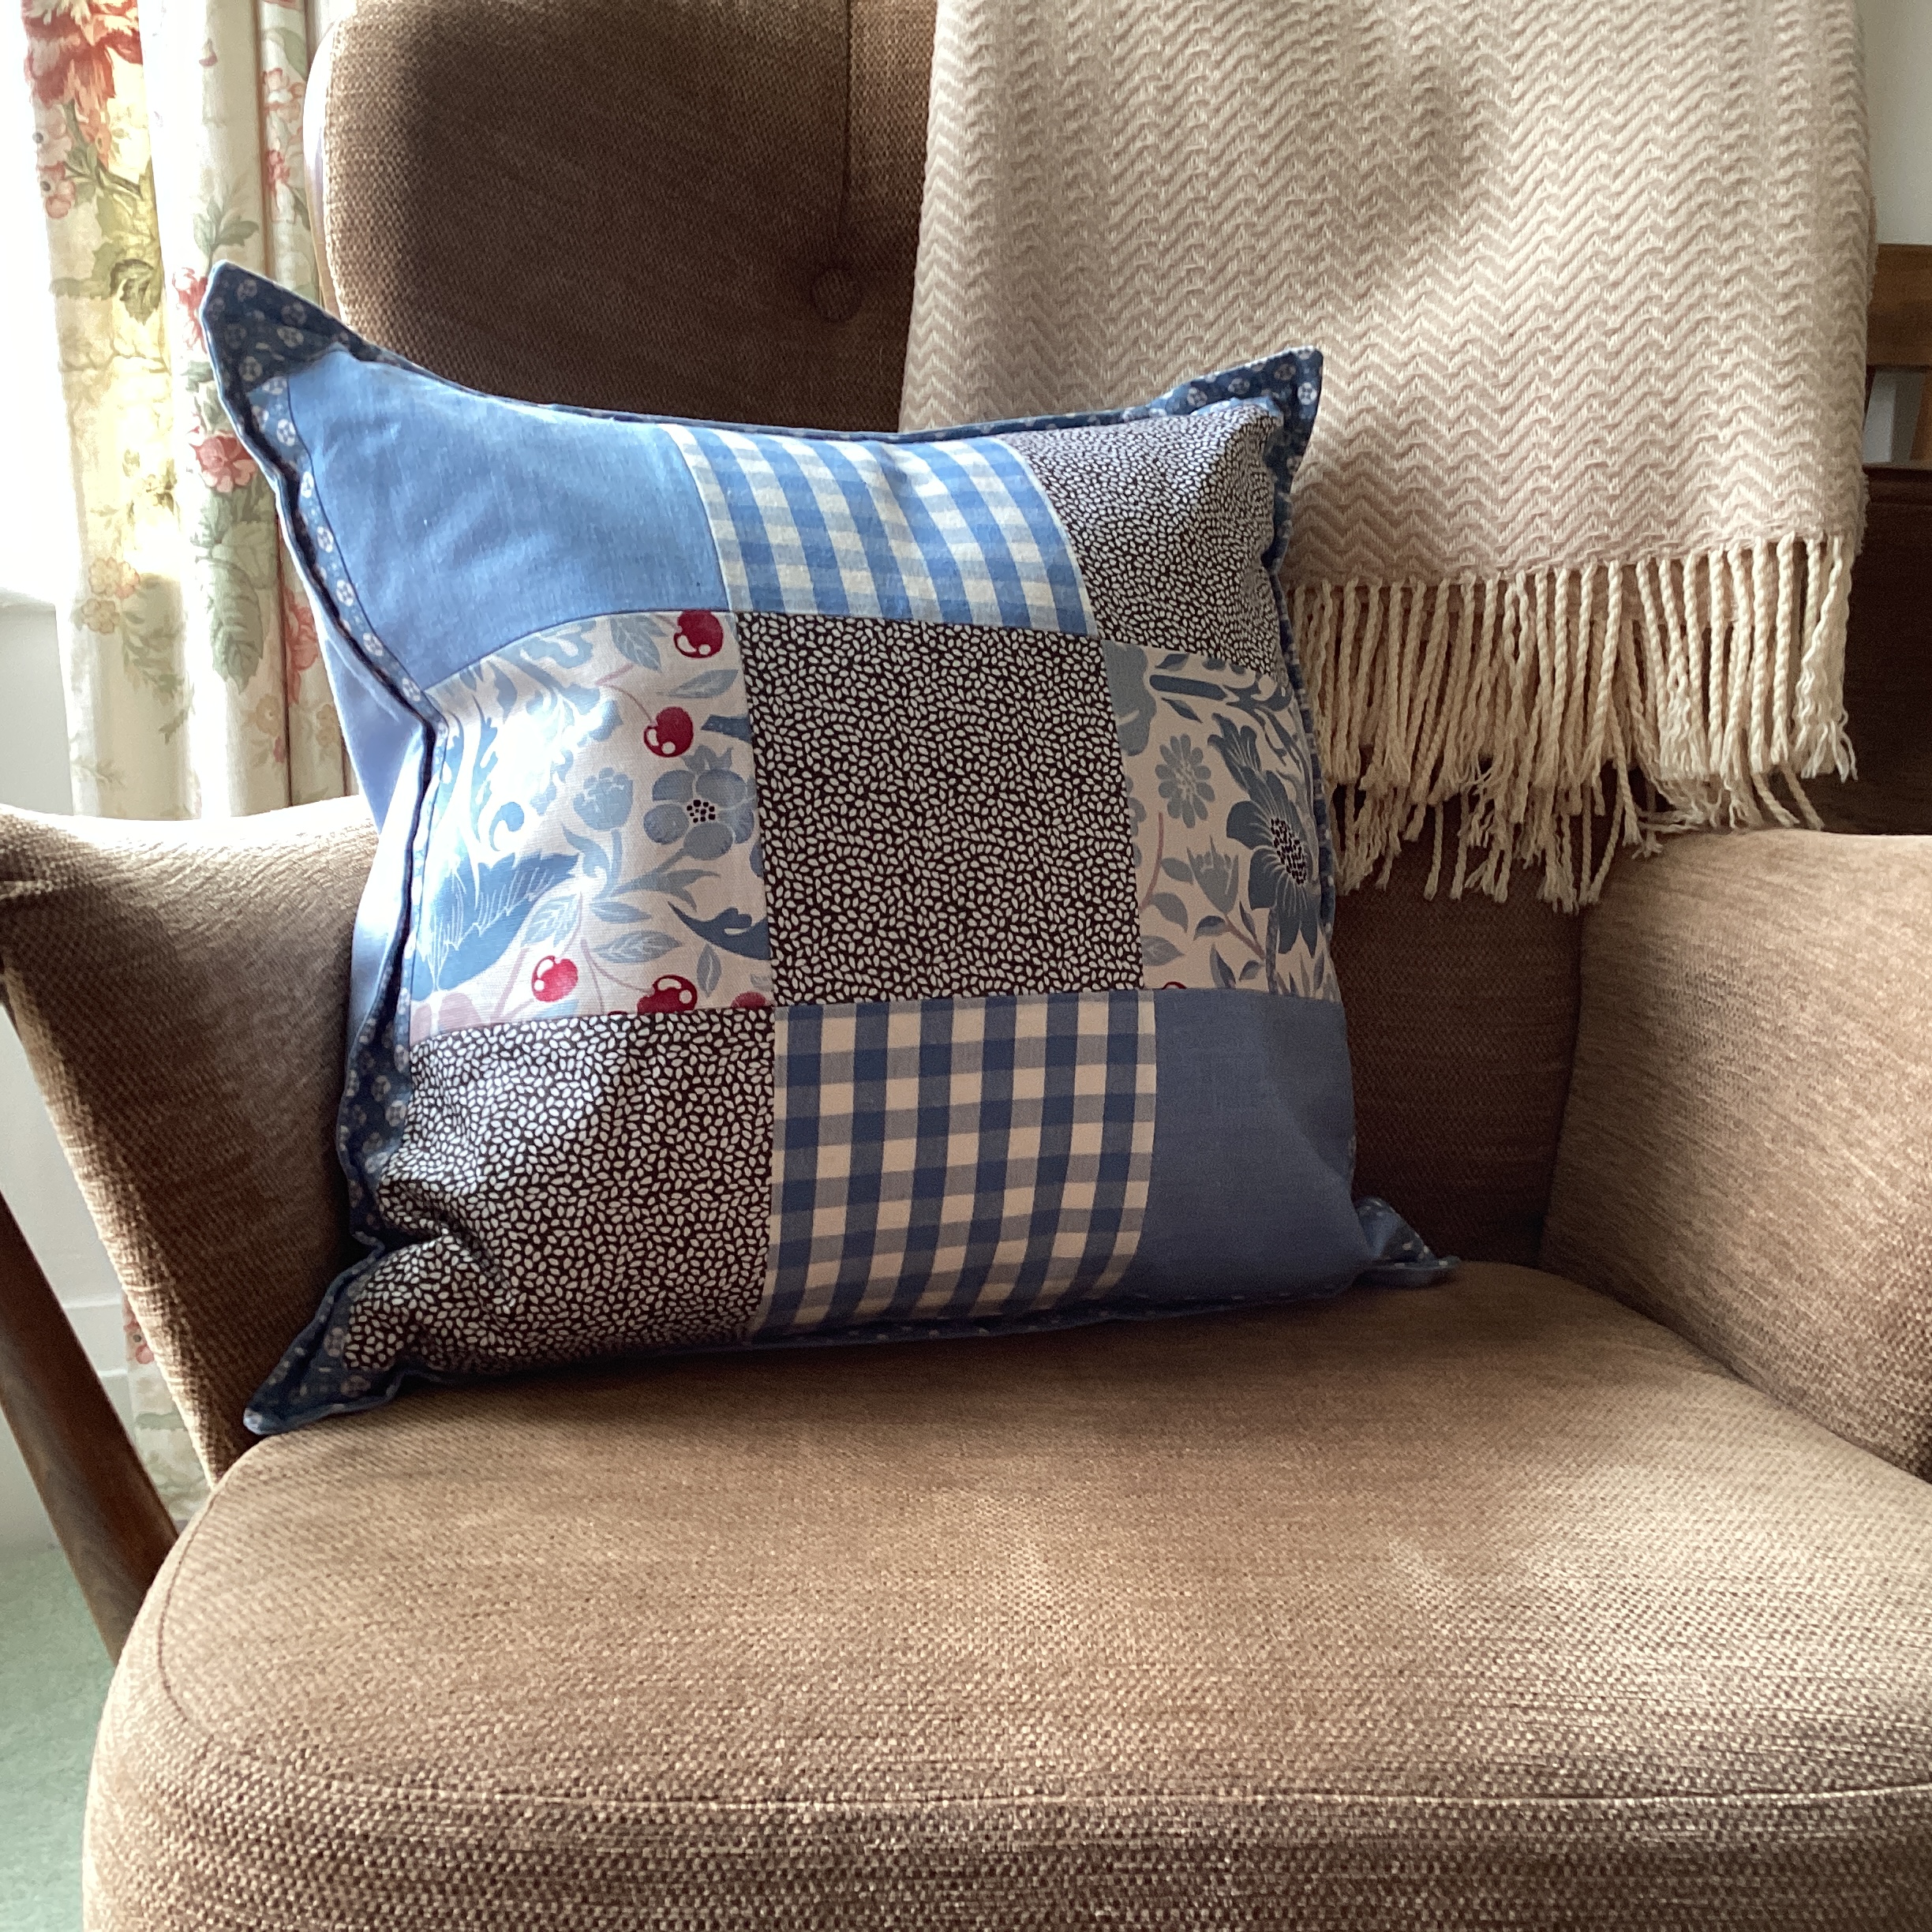 Cushion - patchwork in blue